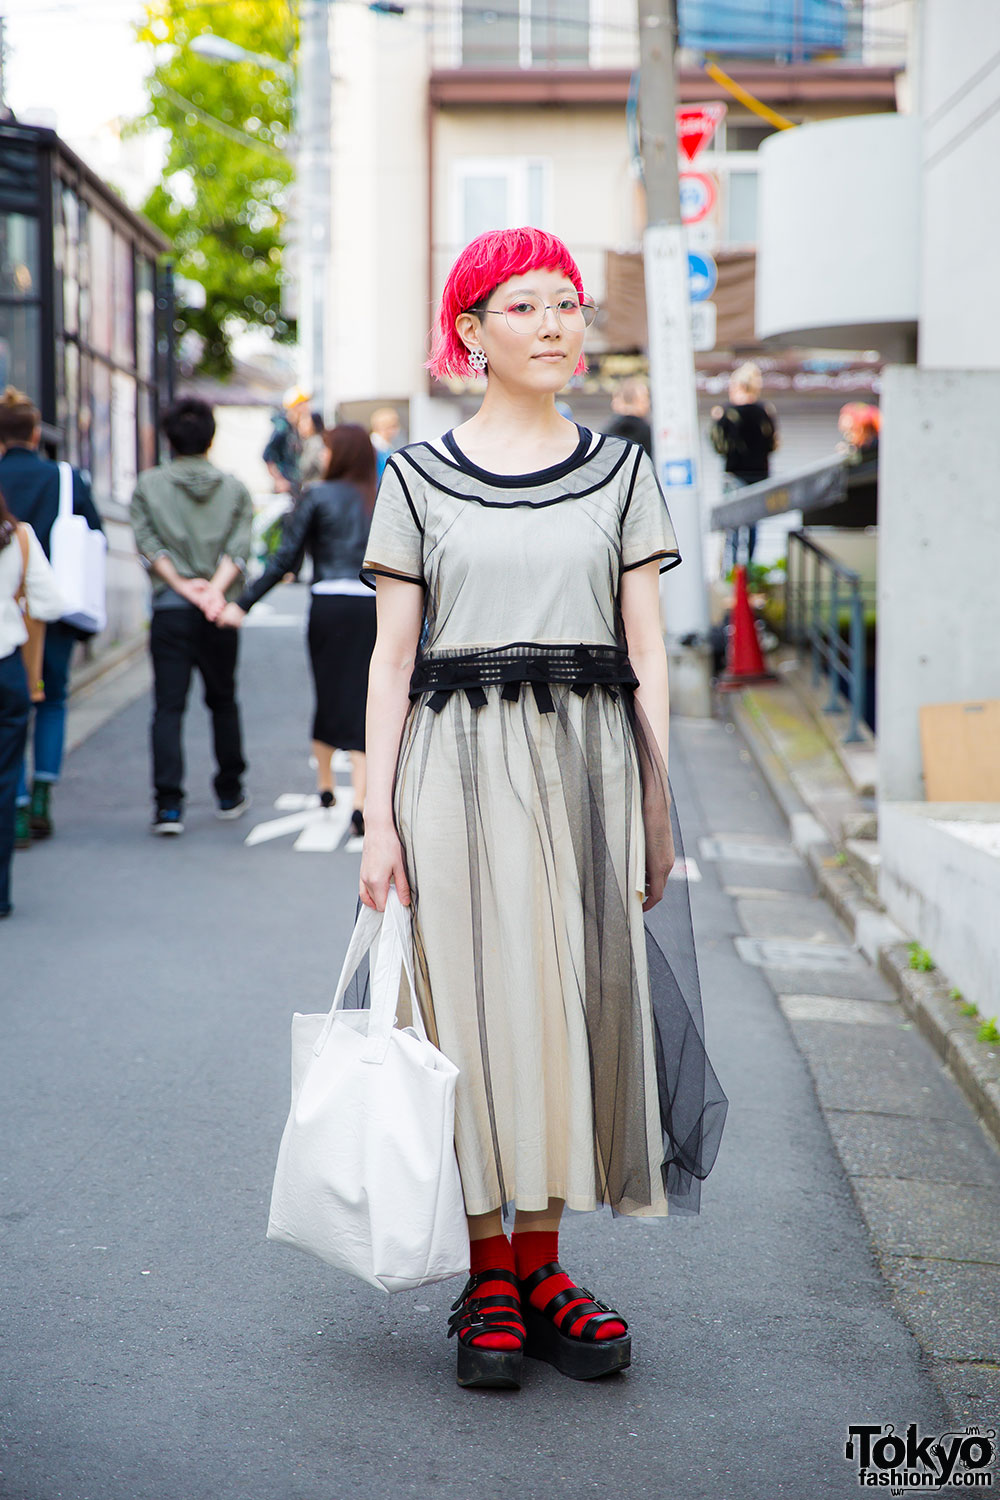 Harajuku Designer w/ Pink Hair in Tricot Comme des Garcons Dress, Zucca ...